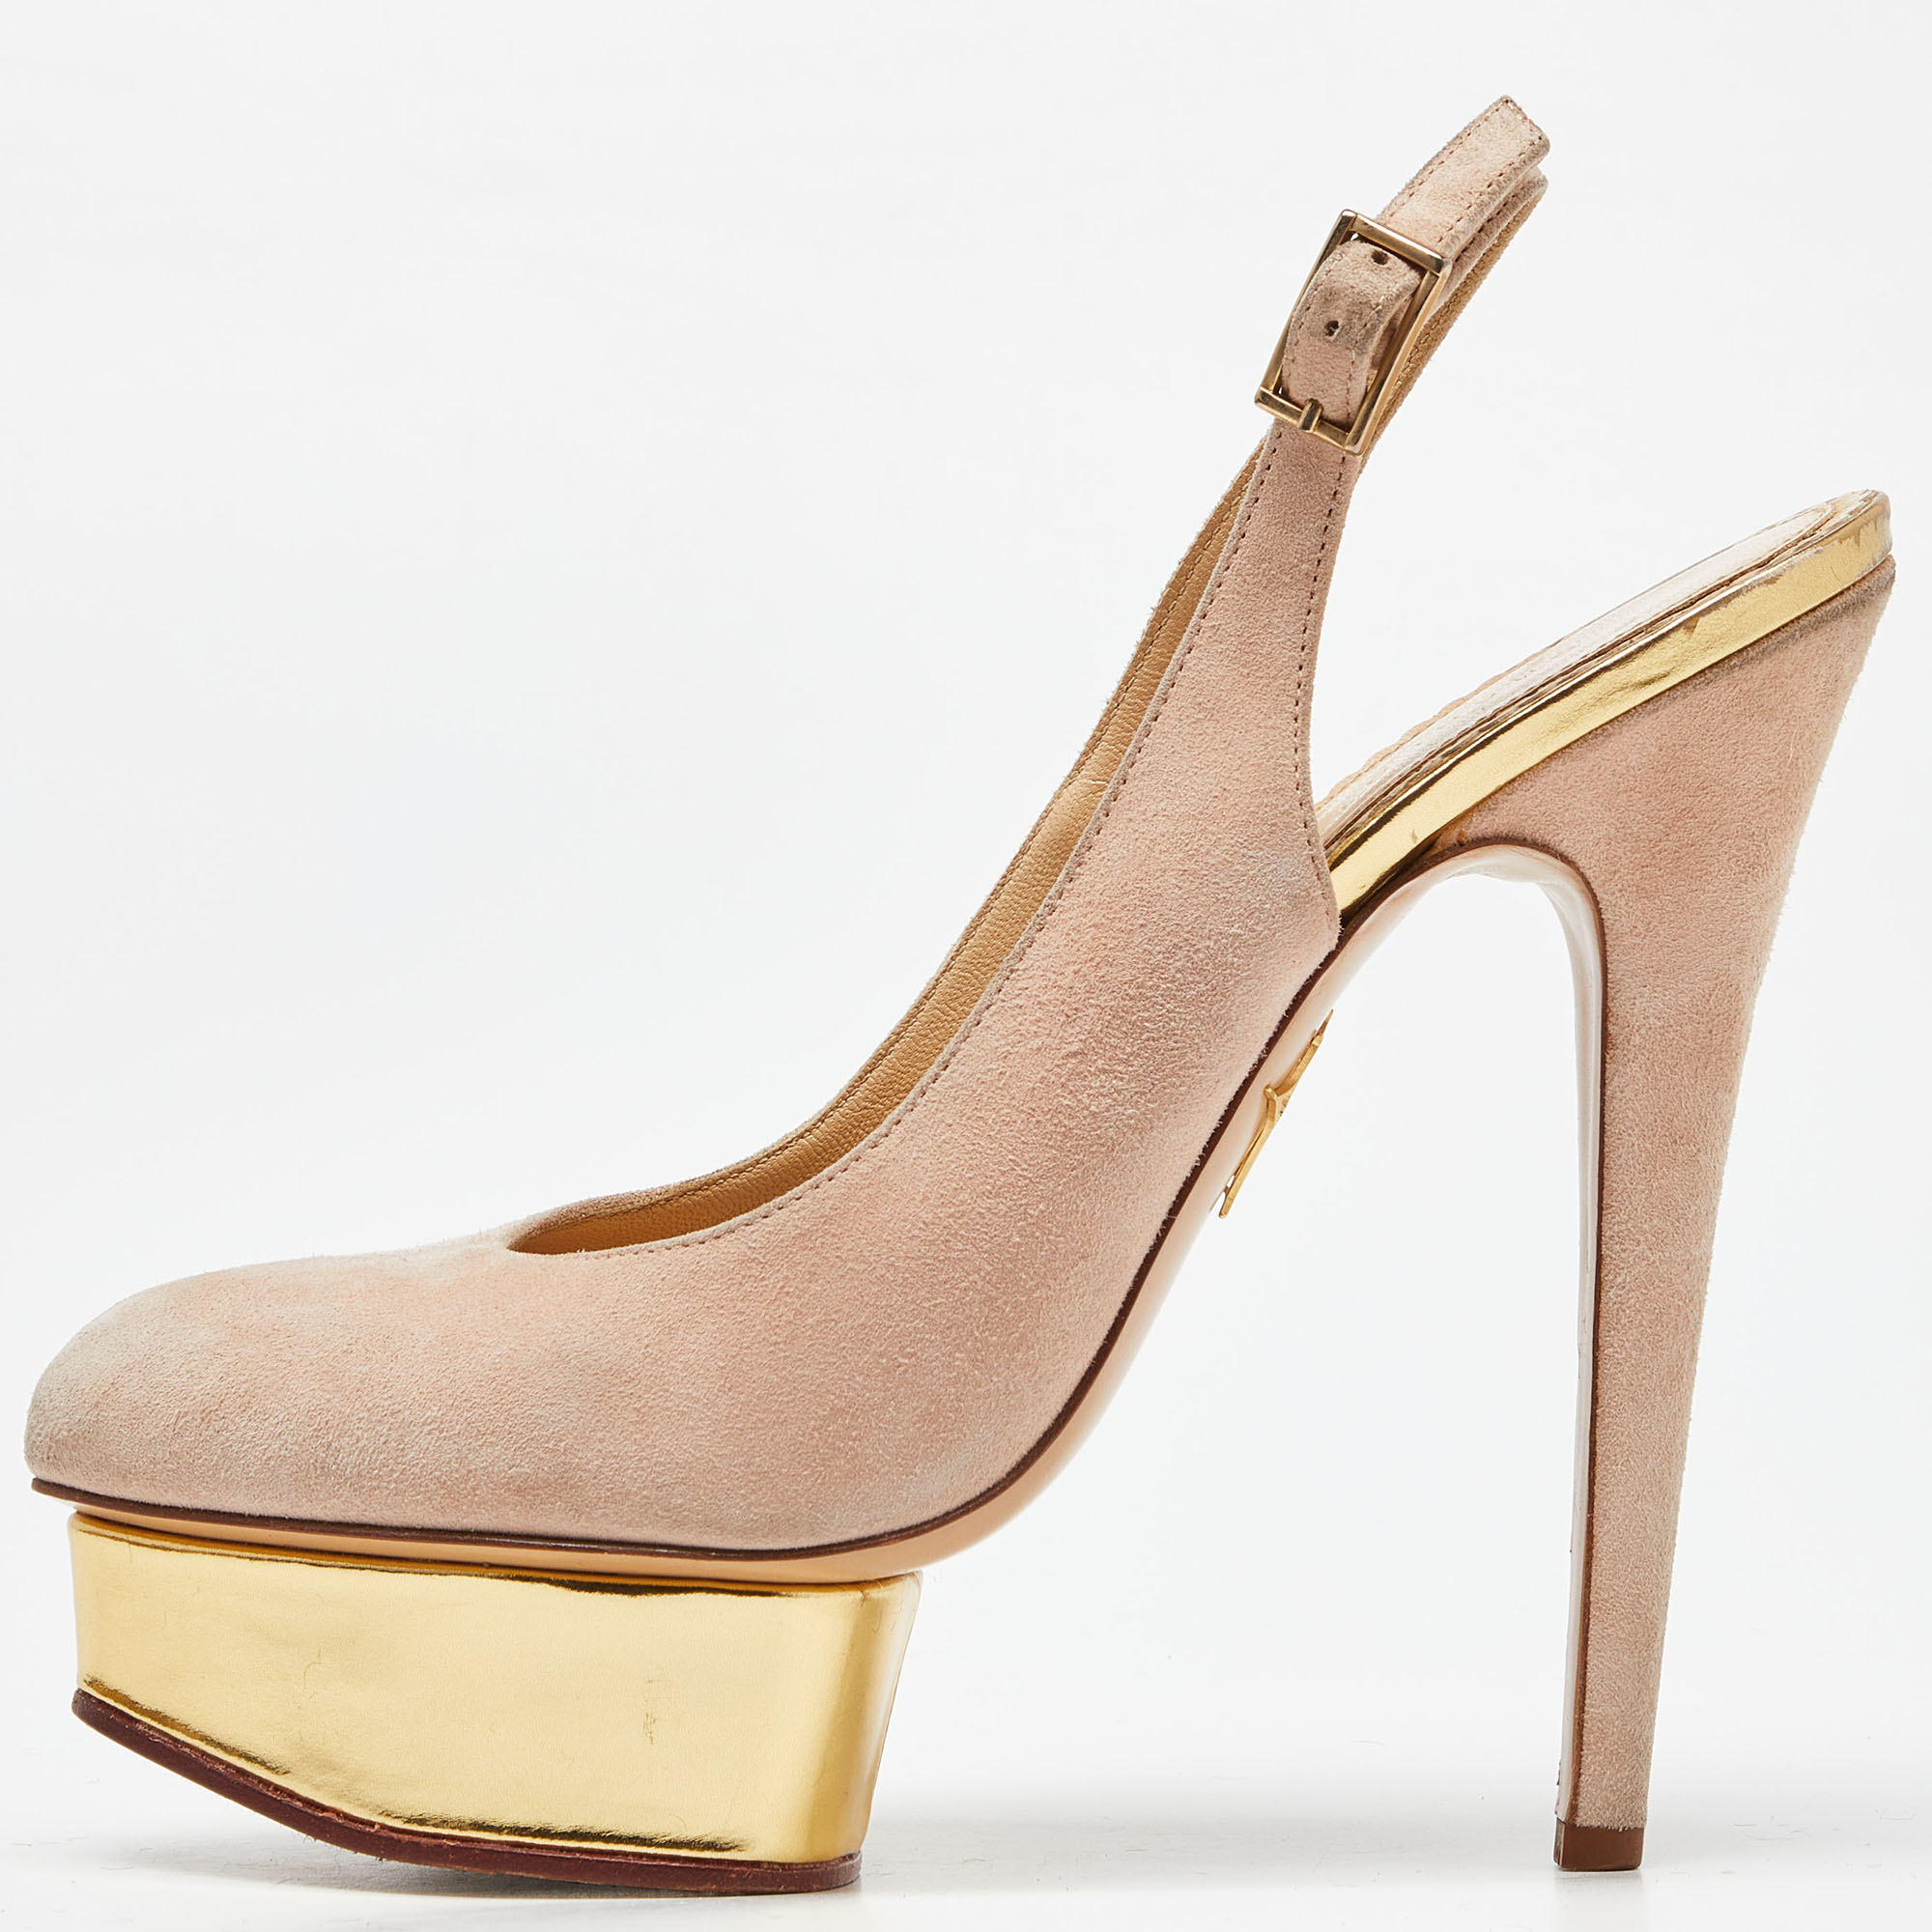 Charlotte olympia beige suede dolly slingback pumps size 39